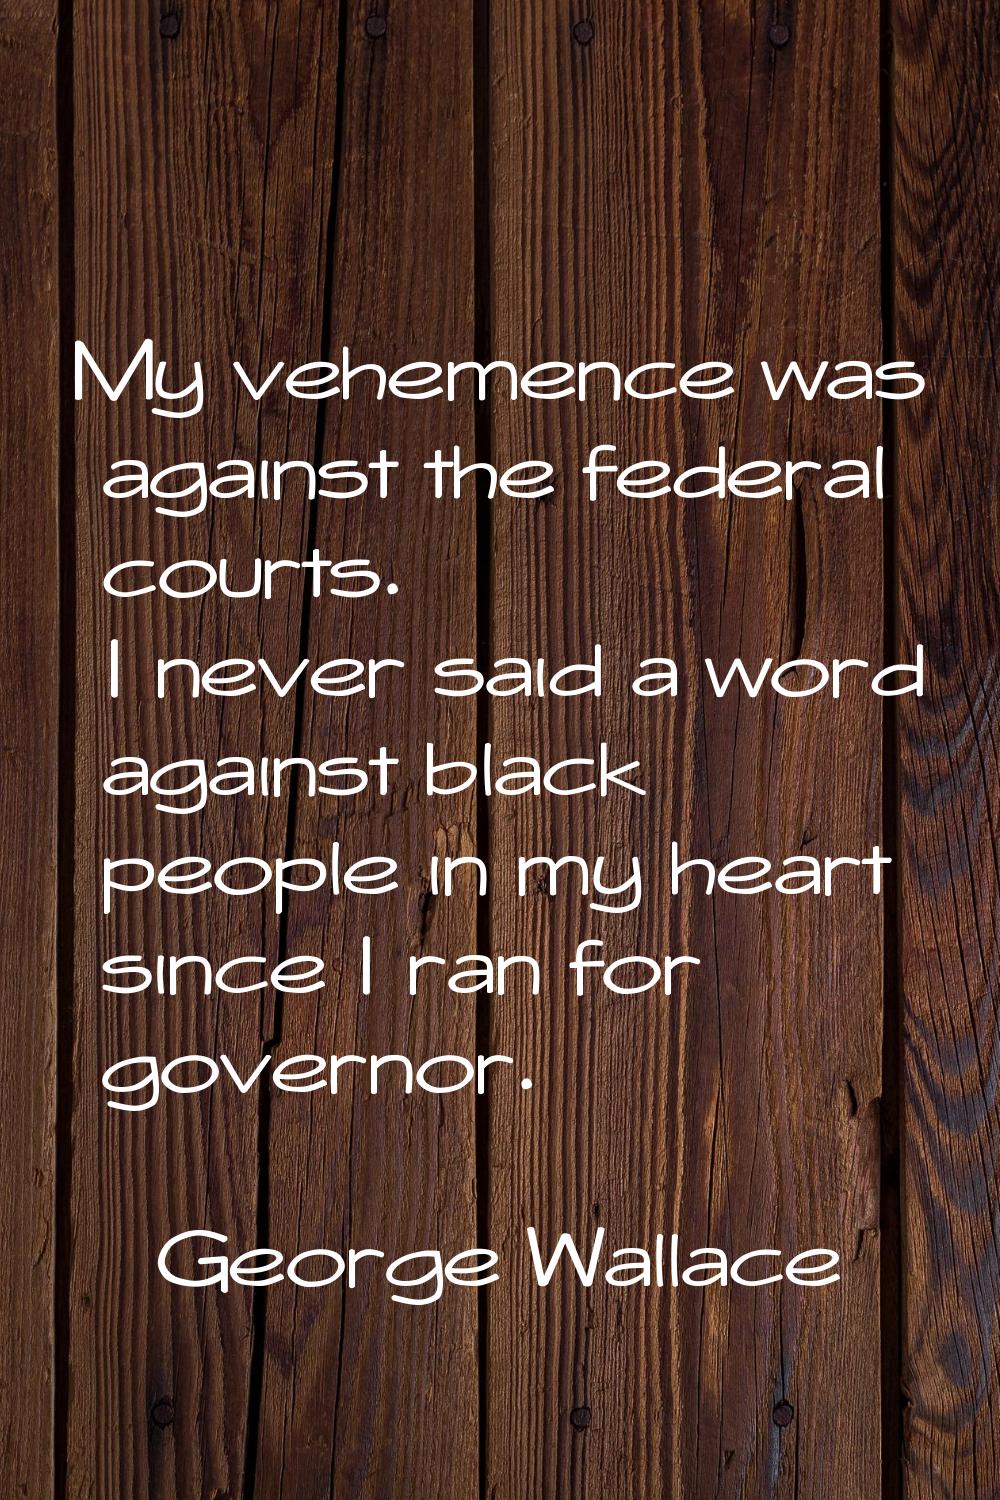 My vehemence was against the federal courts. I never said a word against black people in my heart s